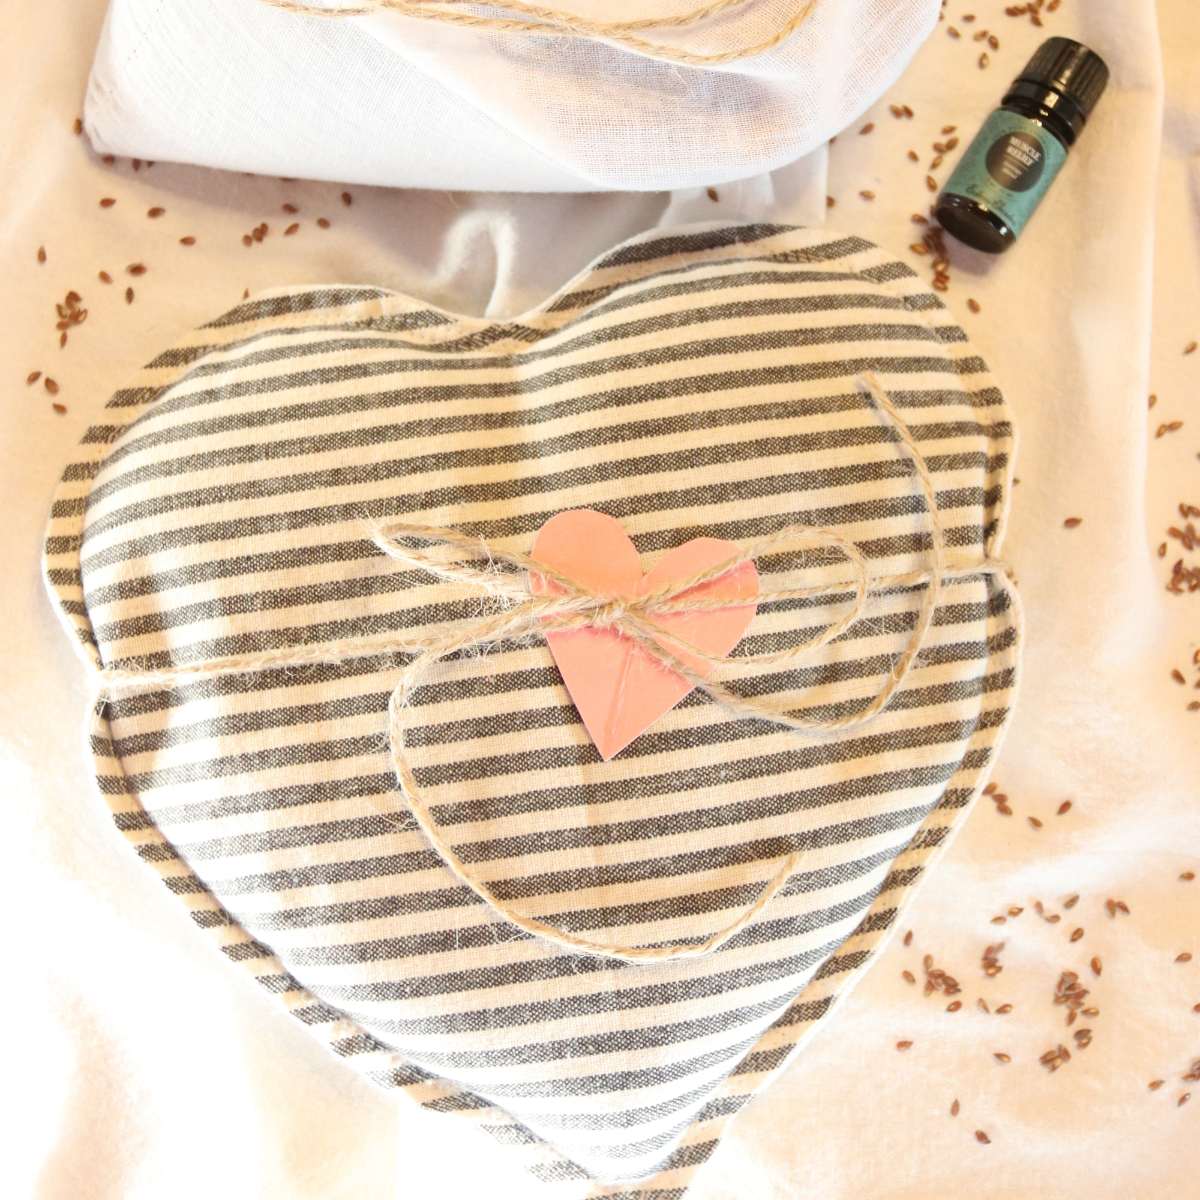 A heart shaped black and white reusable heating pad made with natural flax seeds and essential oils sitting on a white table cloth. The heart shaped heating pad is tied up with a piece of twine and flax seeds are scattered around nearby along with a bottle of essential oil.